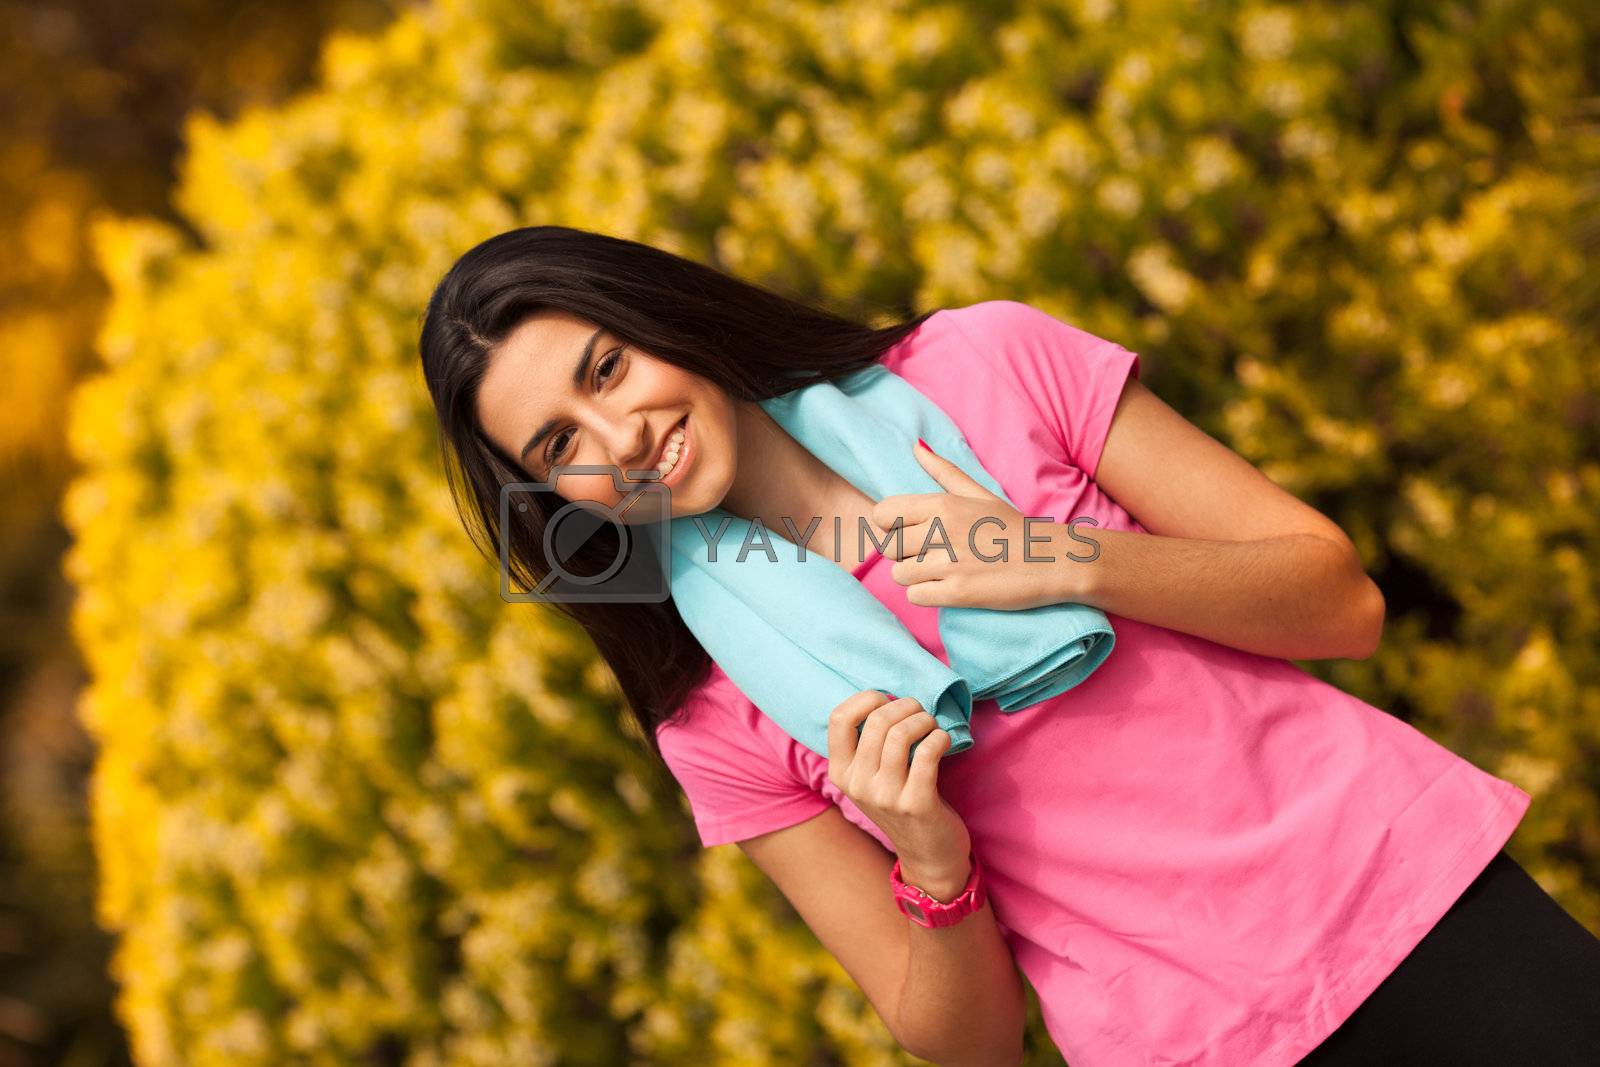 Royalty free image of Sport woman enjoying after fitness session by Lcrespi